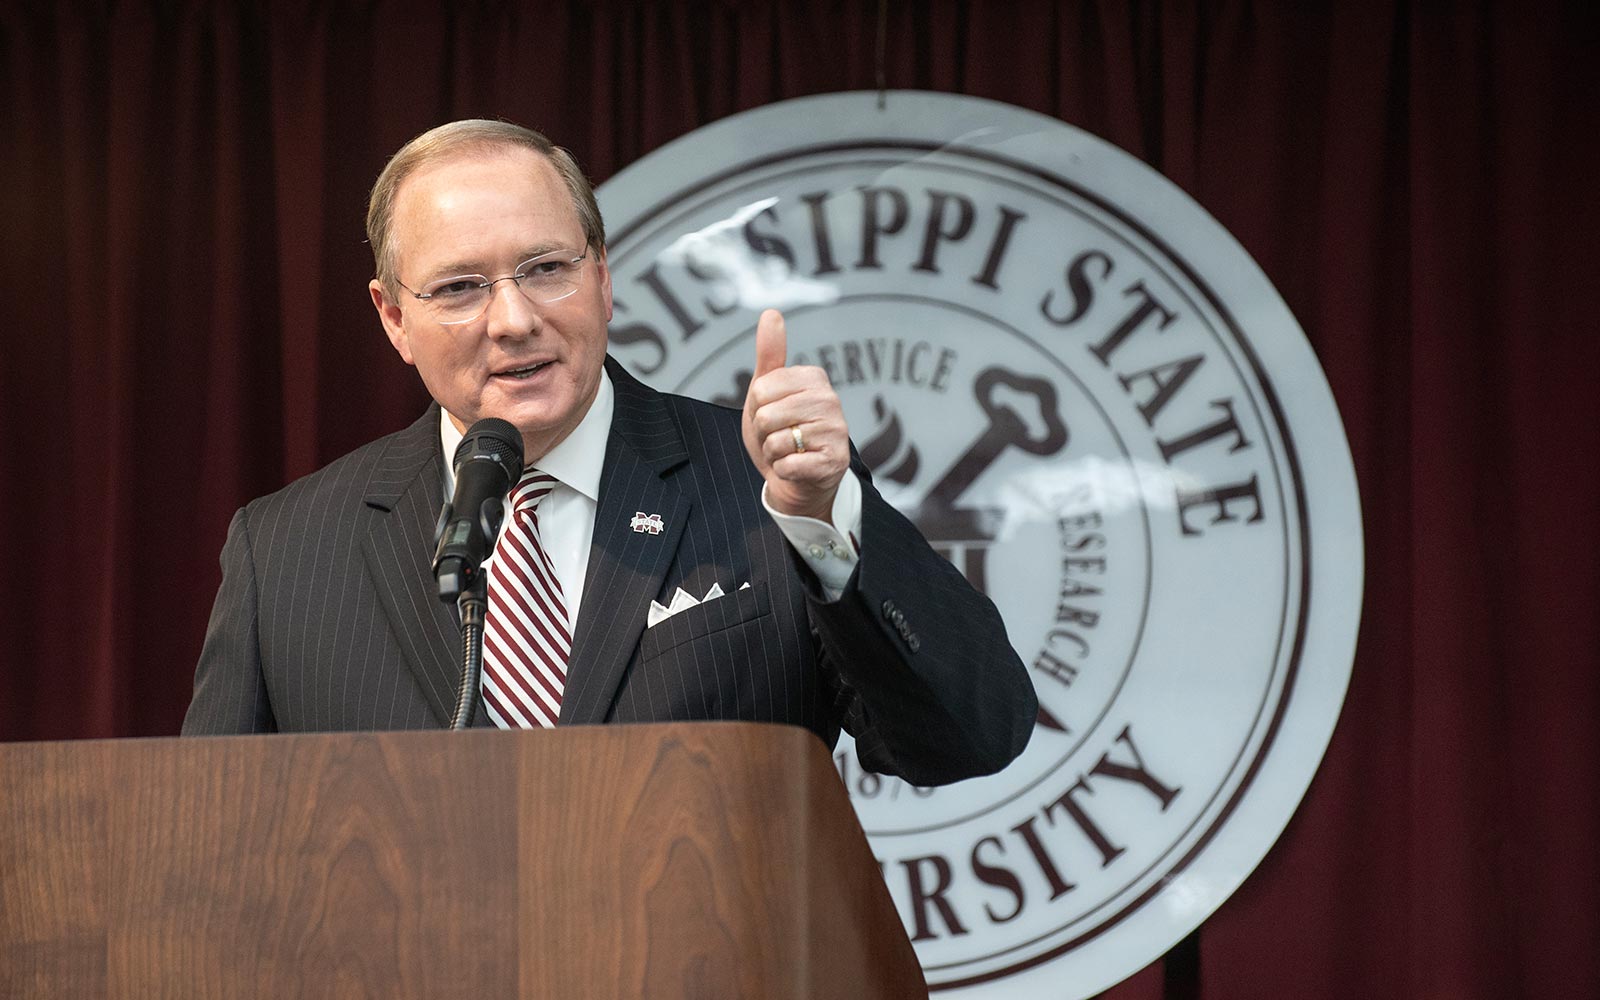 MSU President Mark. E. Keenum speaking at a podium in front of the MSU seal.